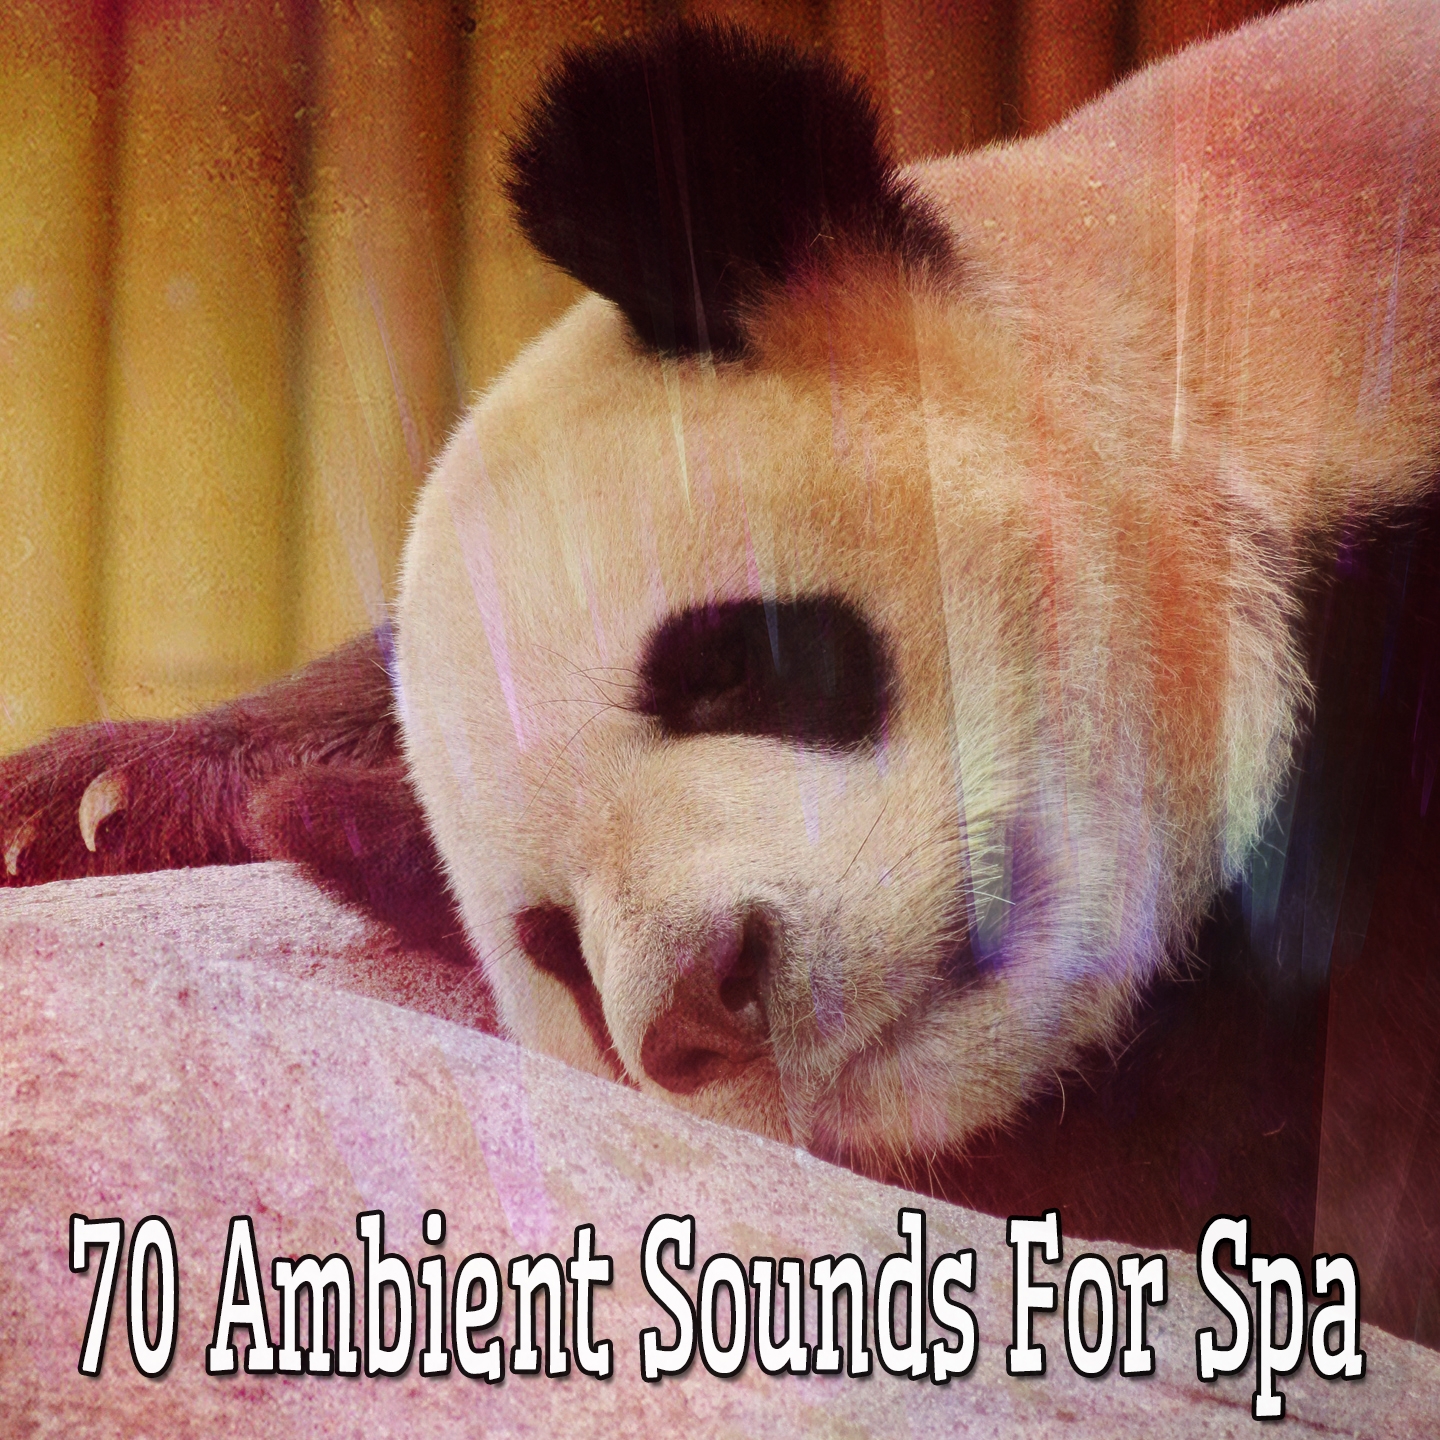 70 Ambient Sounds For Spa